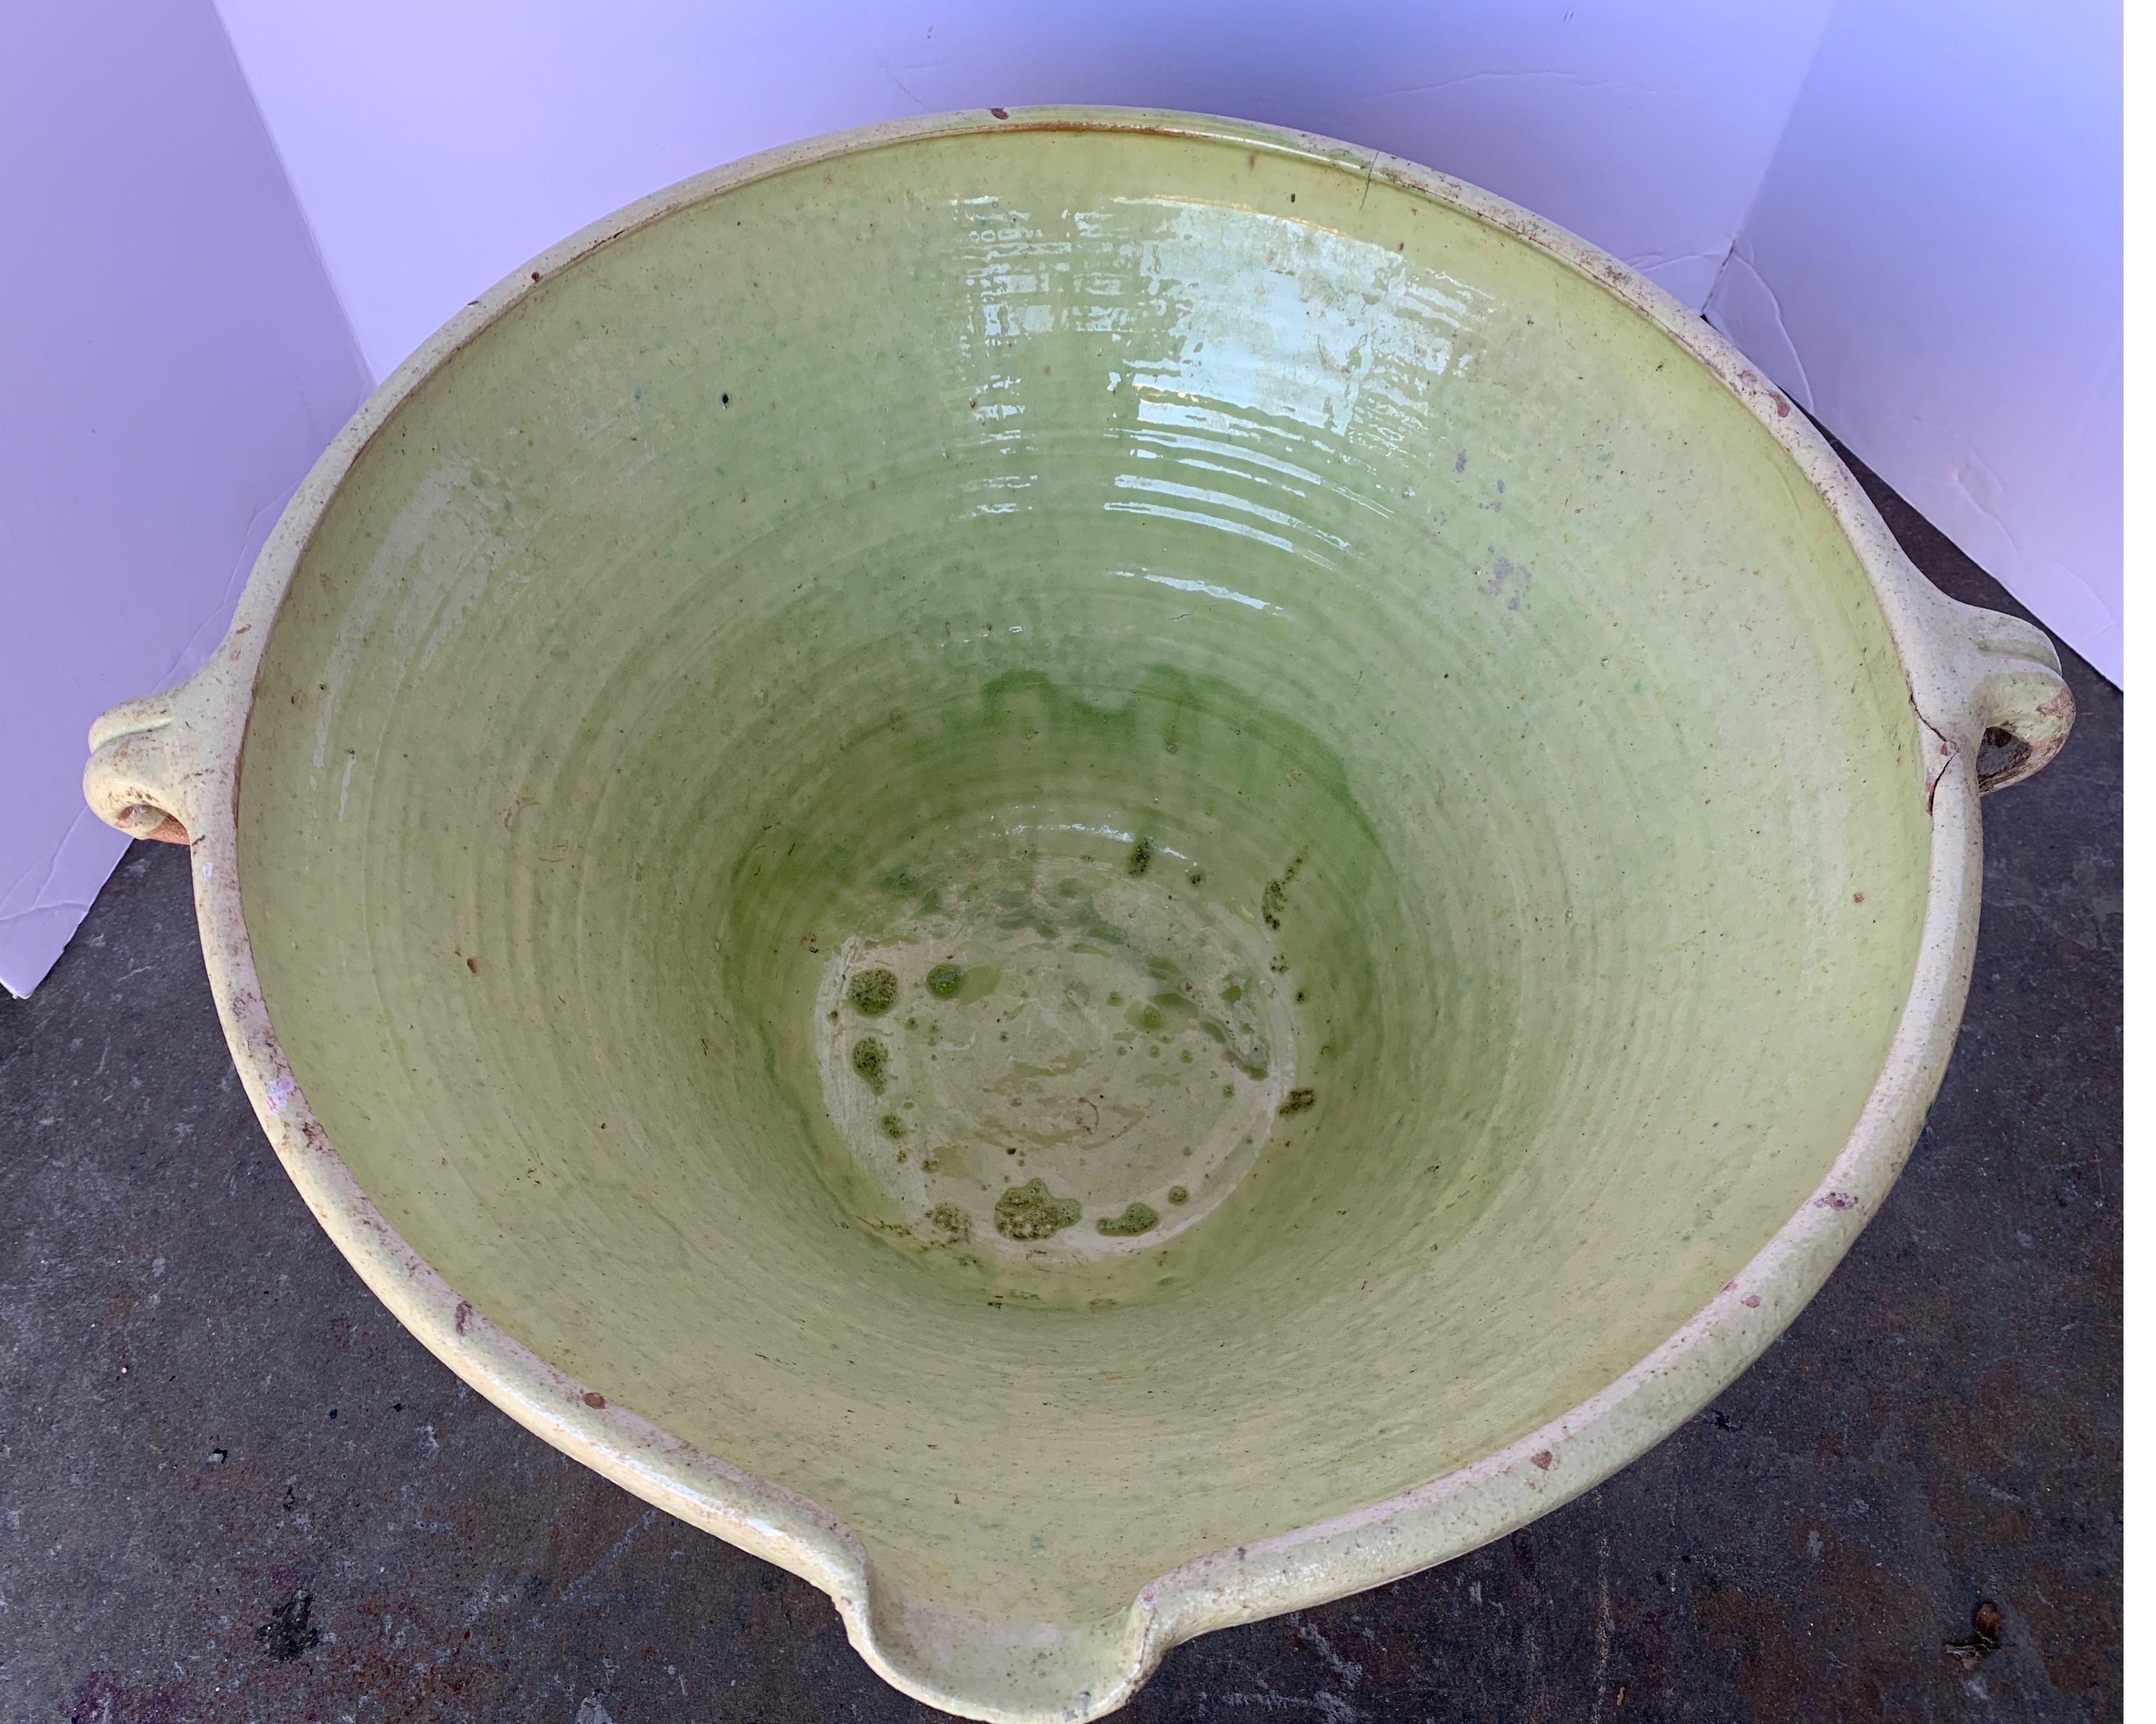 This is a beautiful color of green on this French terracotta bowl that is great used for decoration or to put fruit, ice with wine or anything you can dream up.